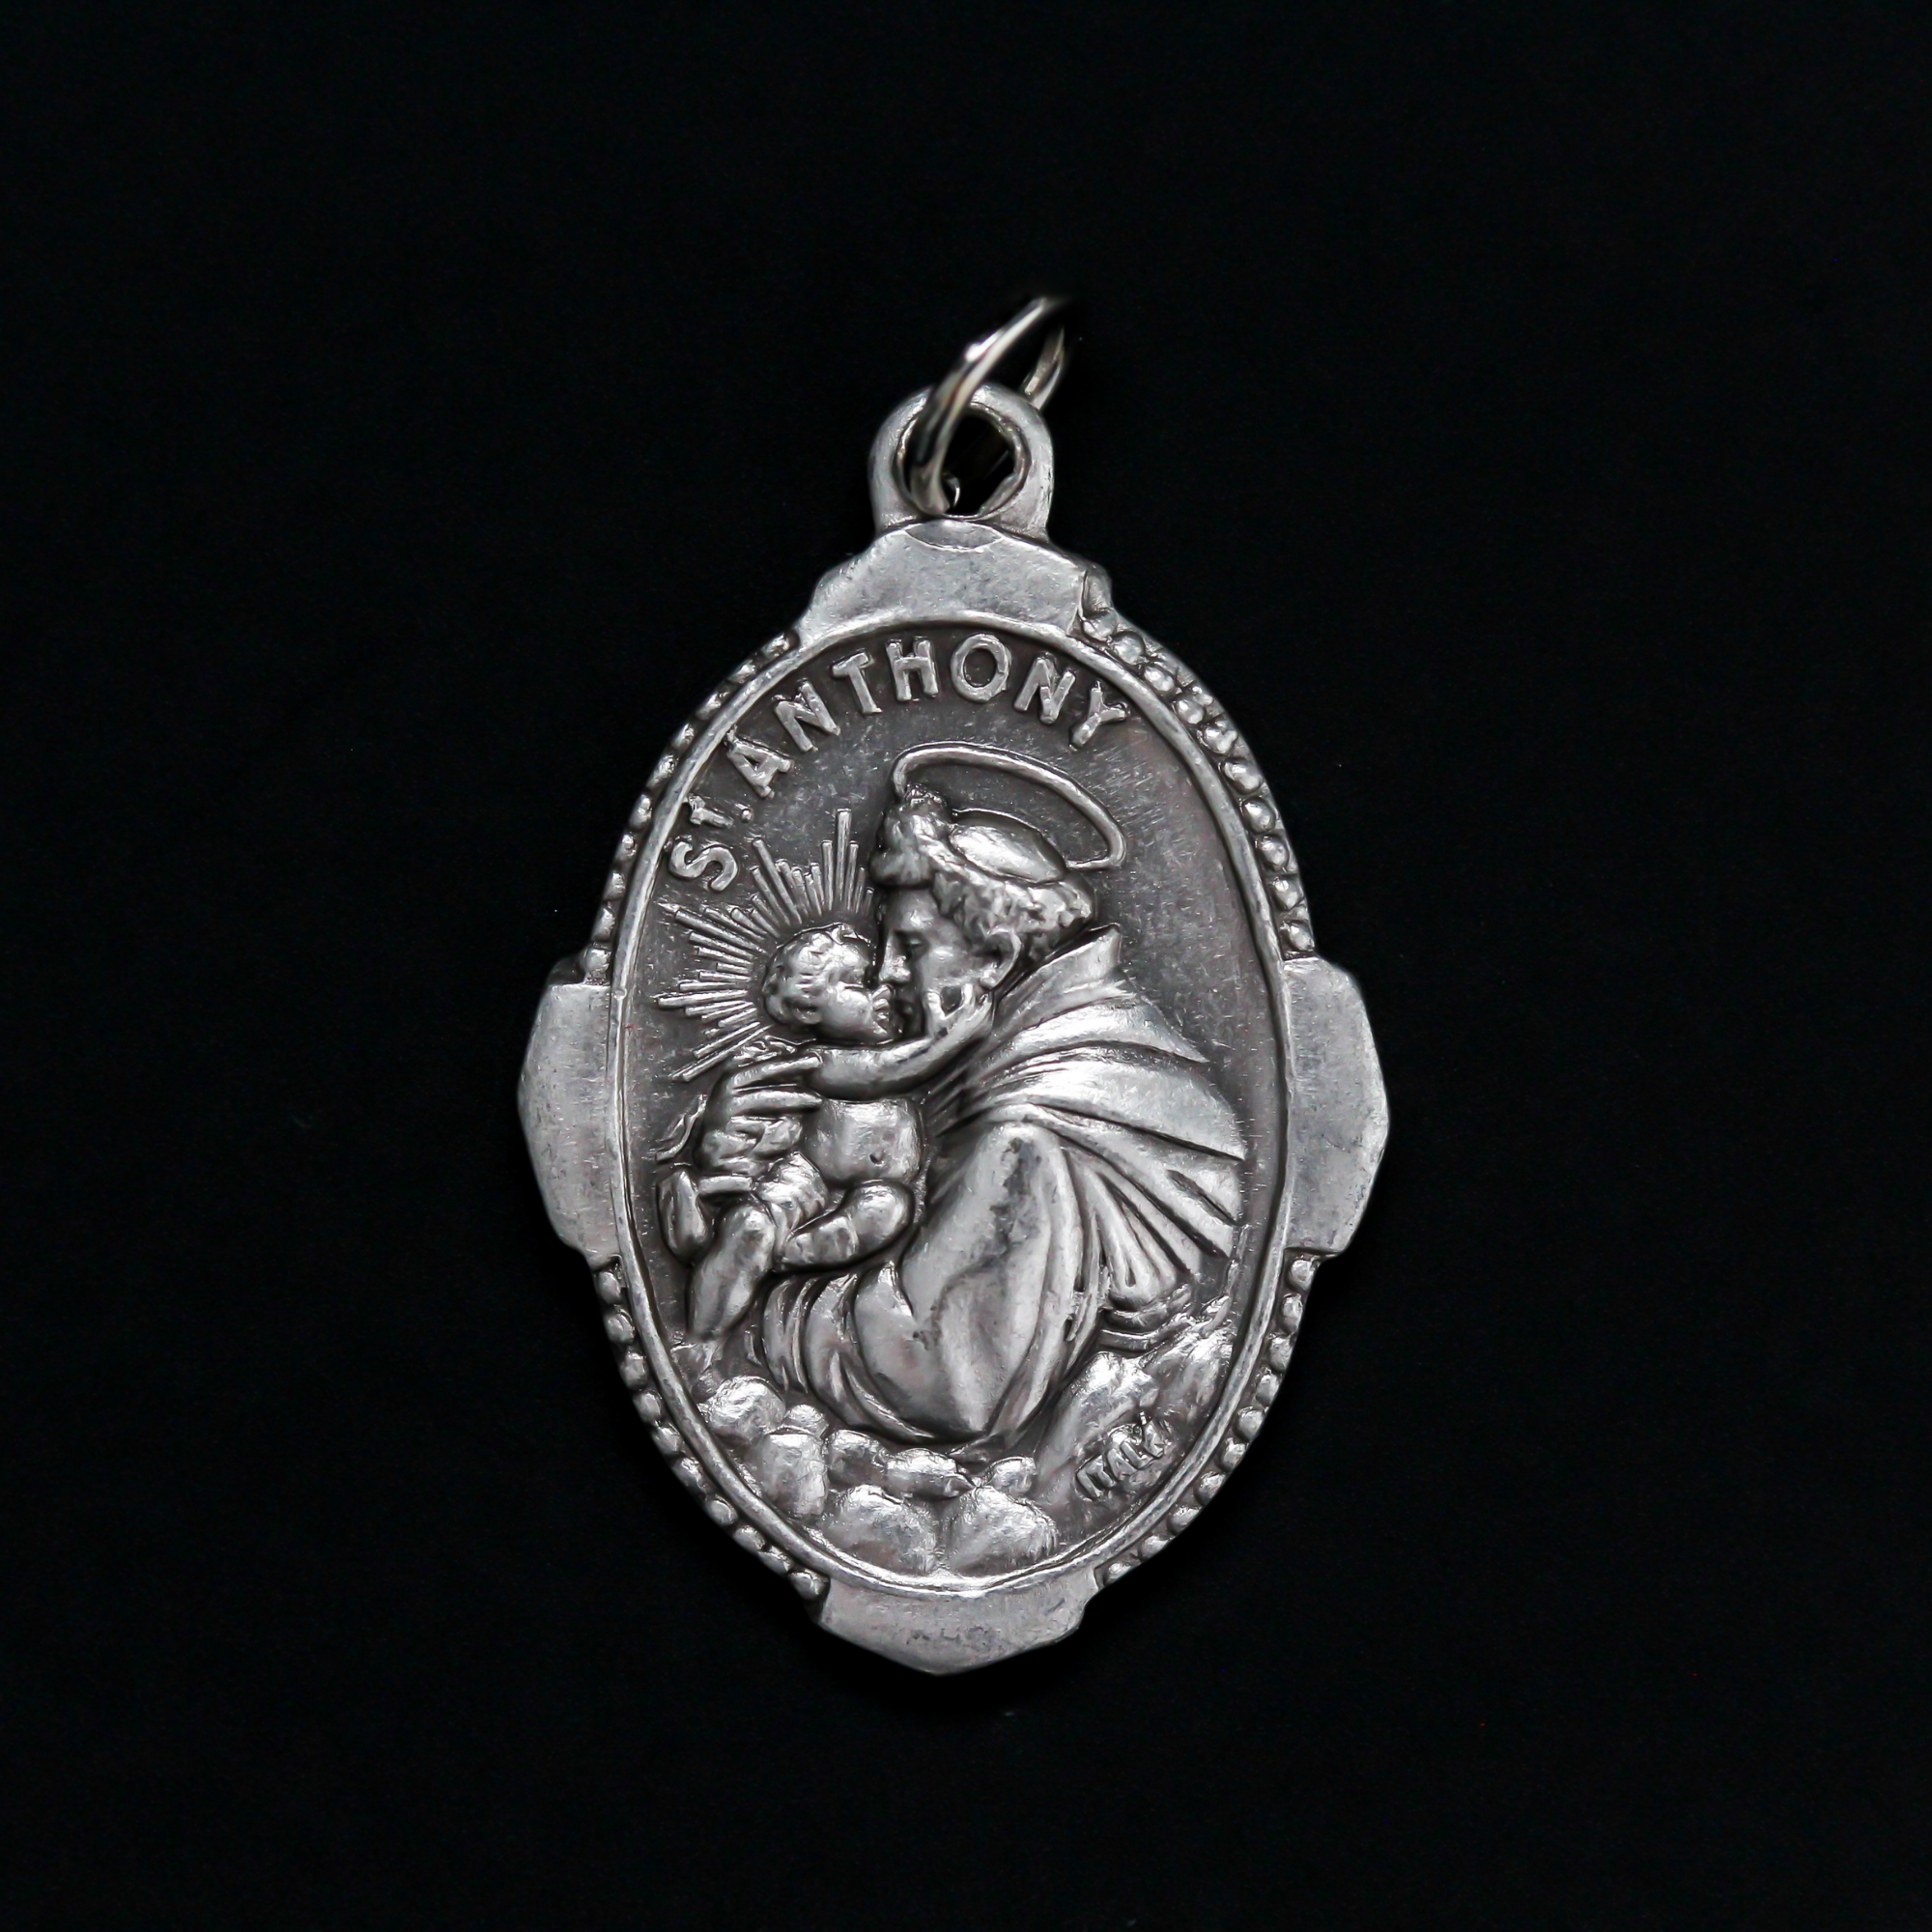 Saint Anthony of Padua deluxe ornate medal that depicts St. Anthony holding infant Jesus on the front and "Pray For Us" on the back